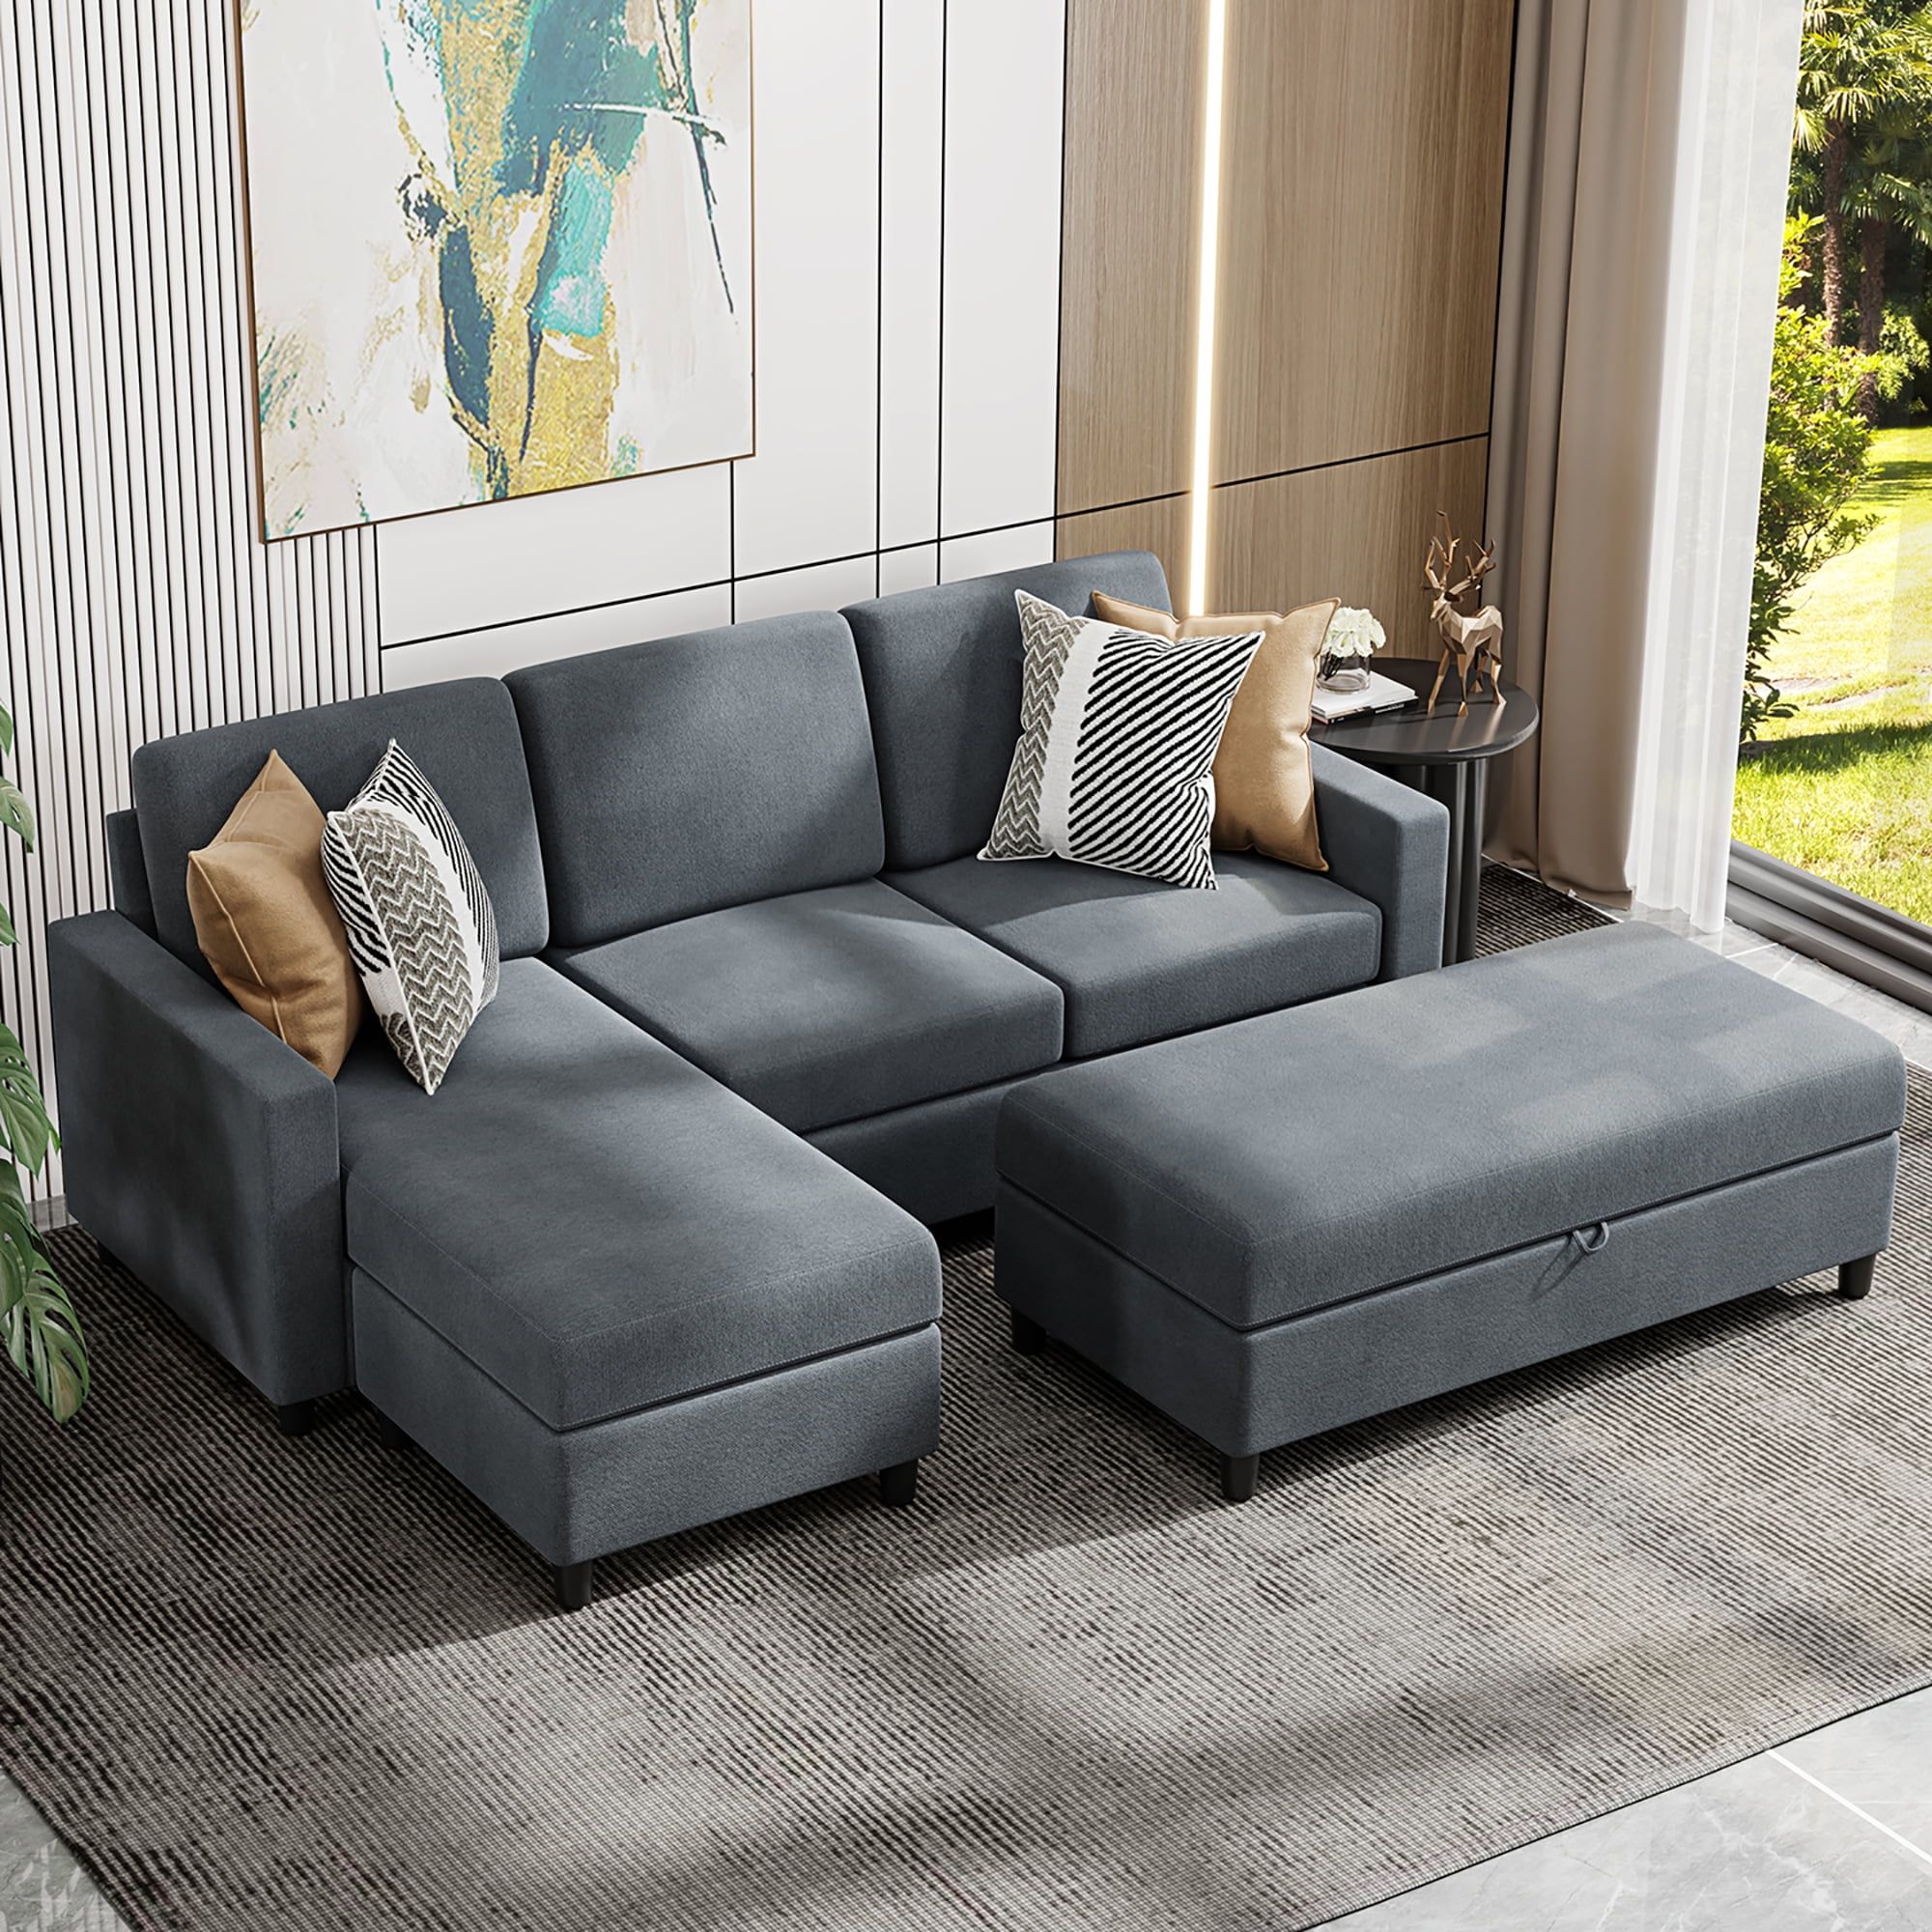 Convertible Sectional Sofa Couch With Storage Ottoman, L Shaped Wide Reversible  Chaise With Linen Fabric(Charcoal Grey) – Walmart Throughout L Shape Couches With Reversible Chaises (Photo 1 of 15)